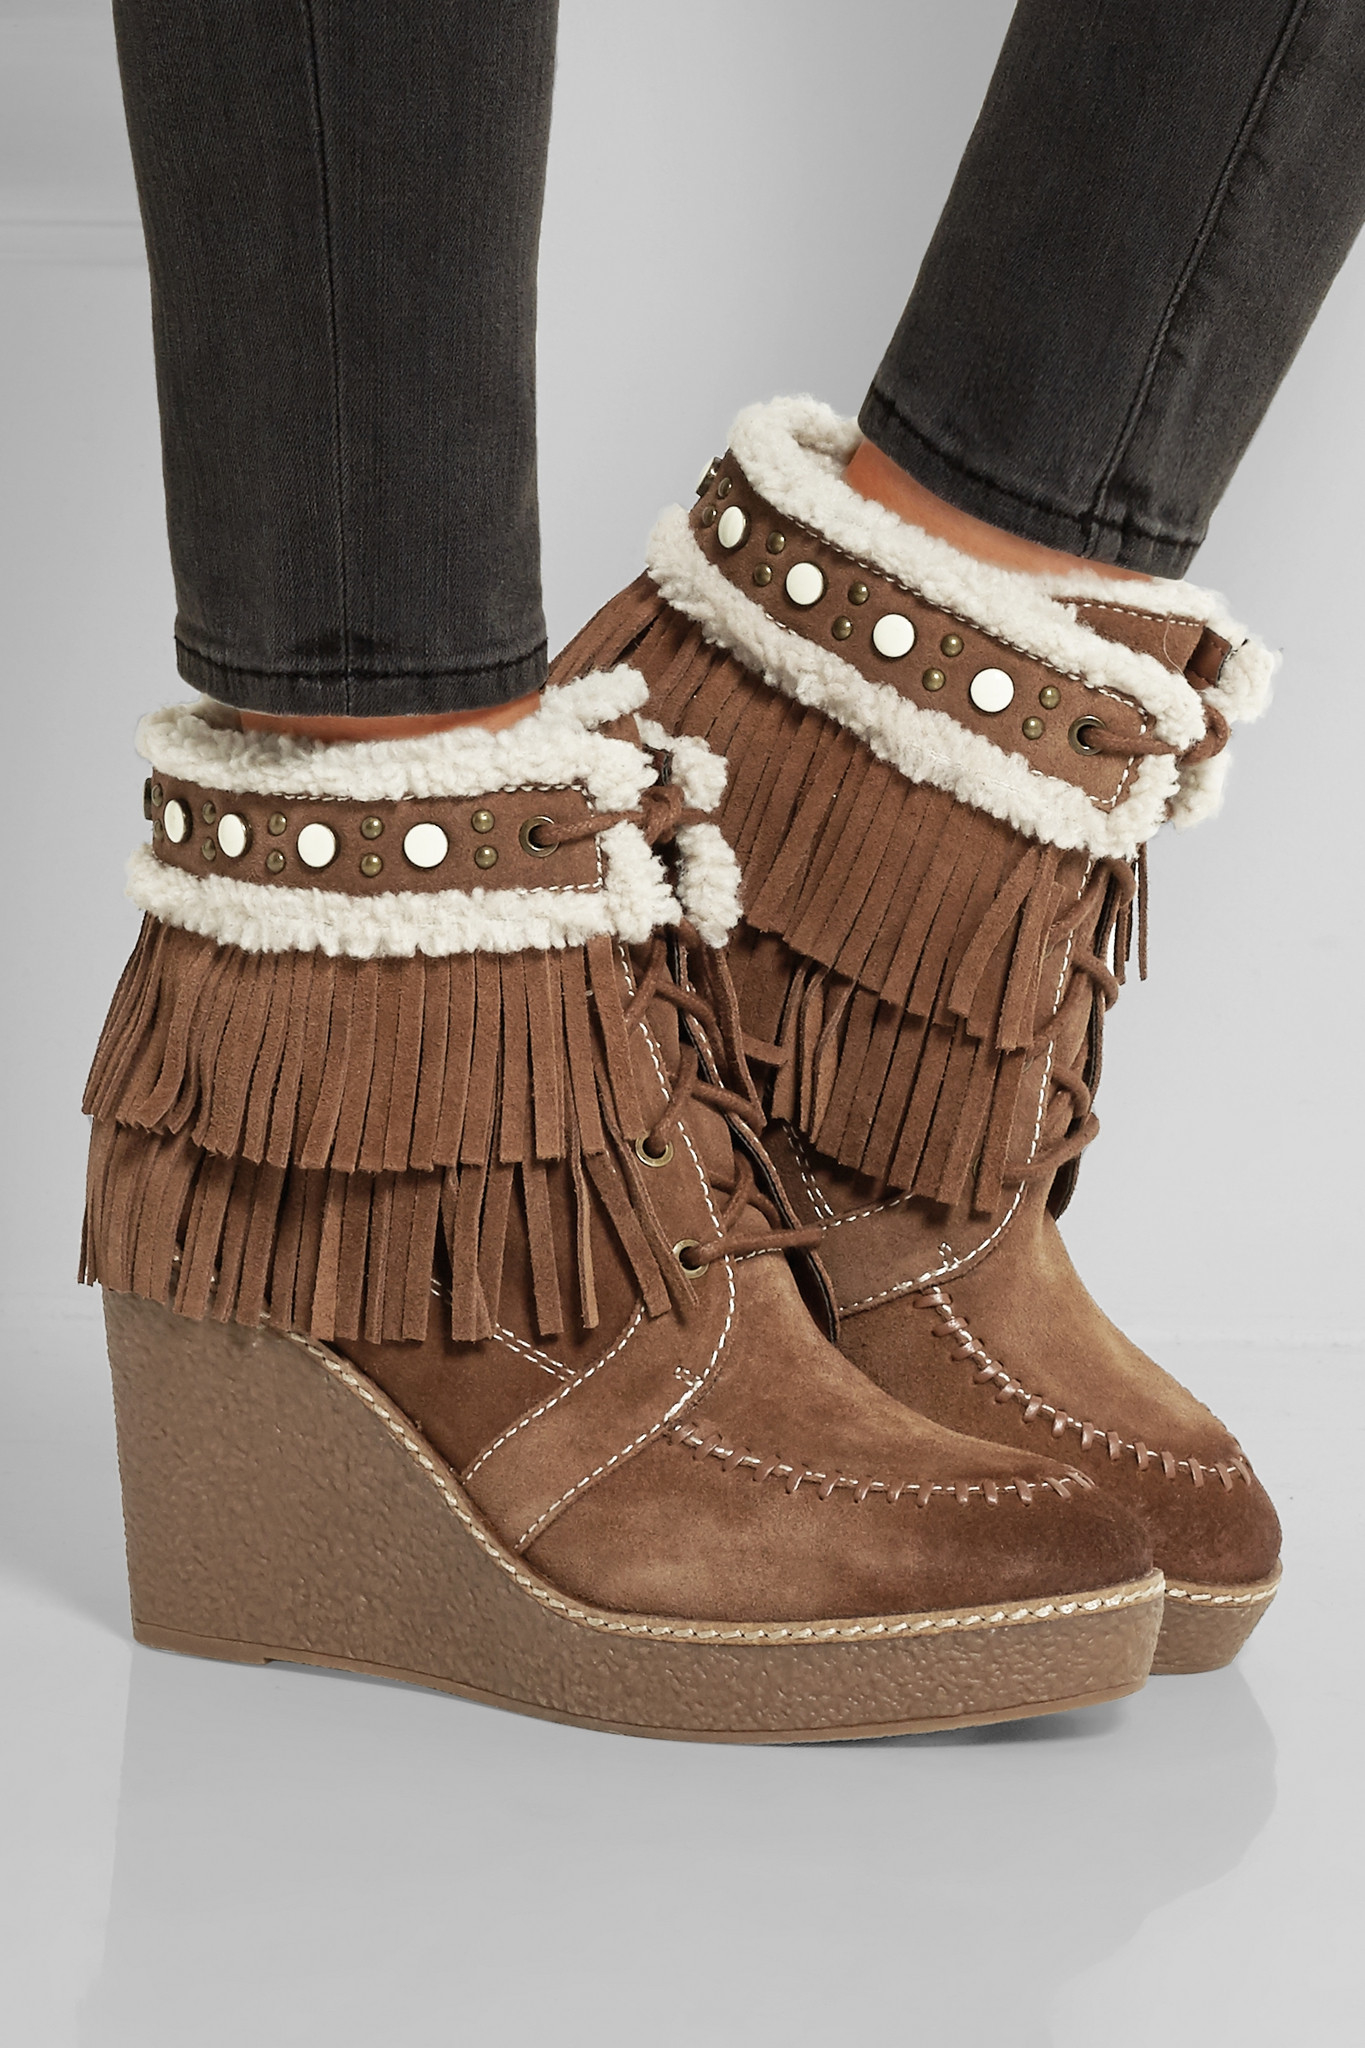 Lyst - Sam Edelman - Kemper Faux Shearling-lined Fringed Suede Wedge ...